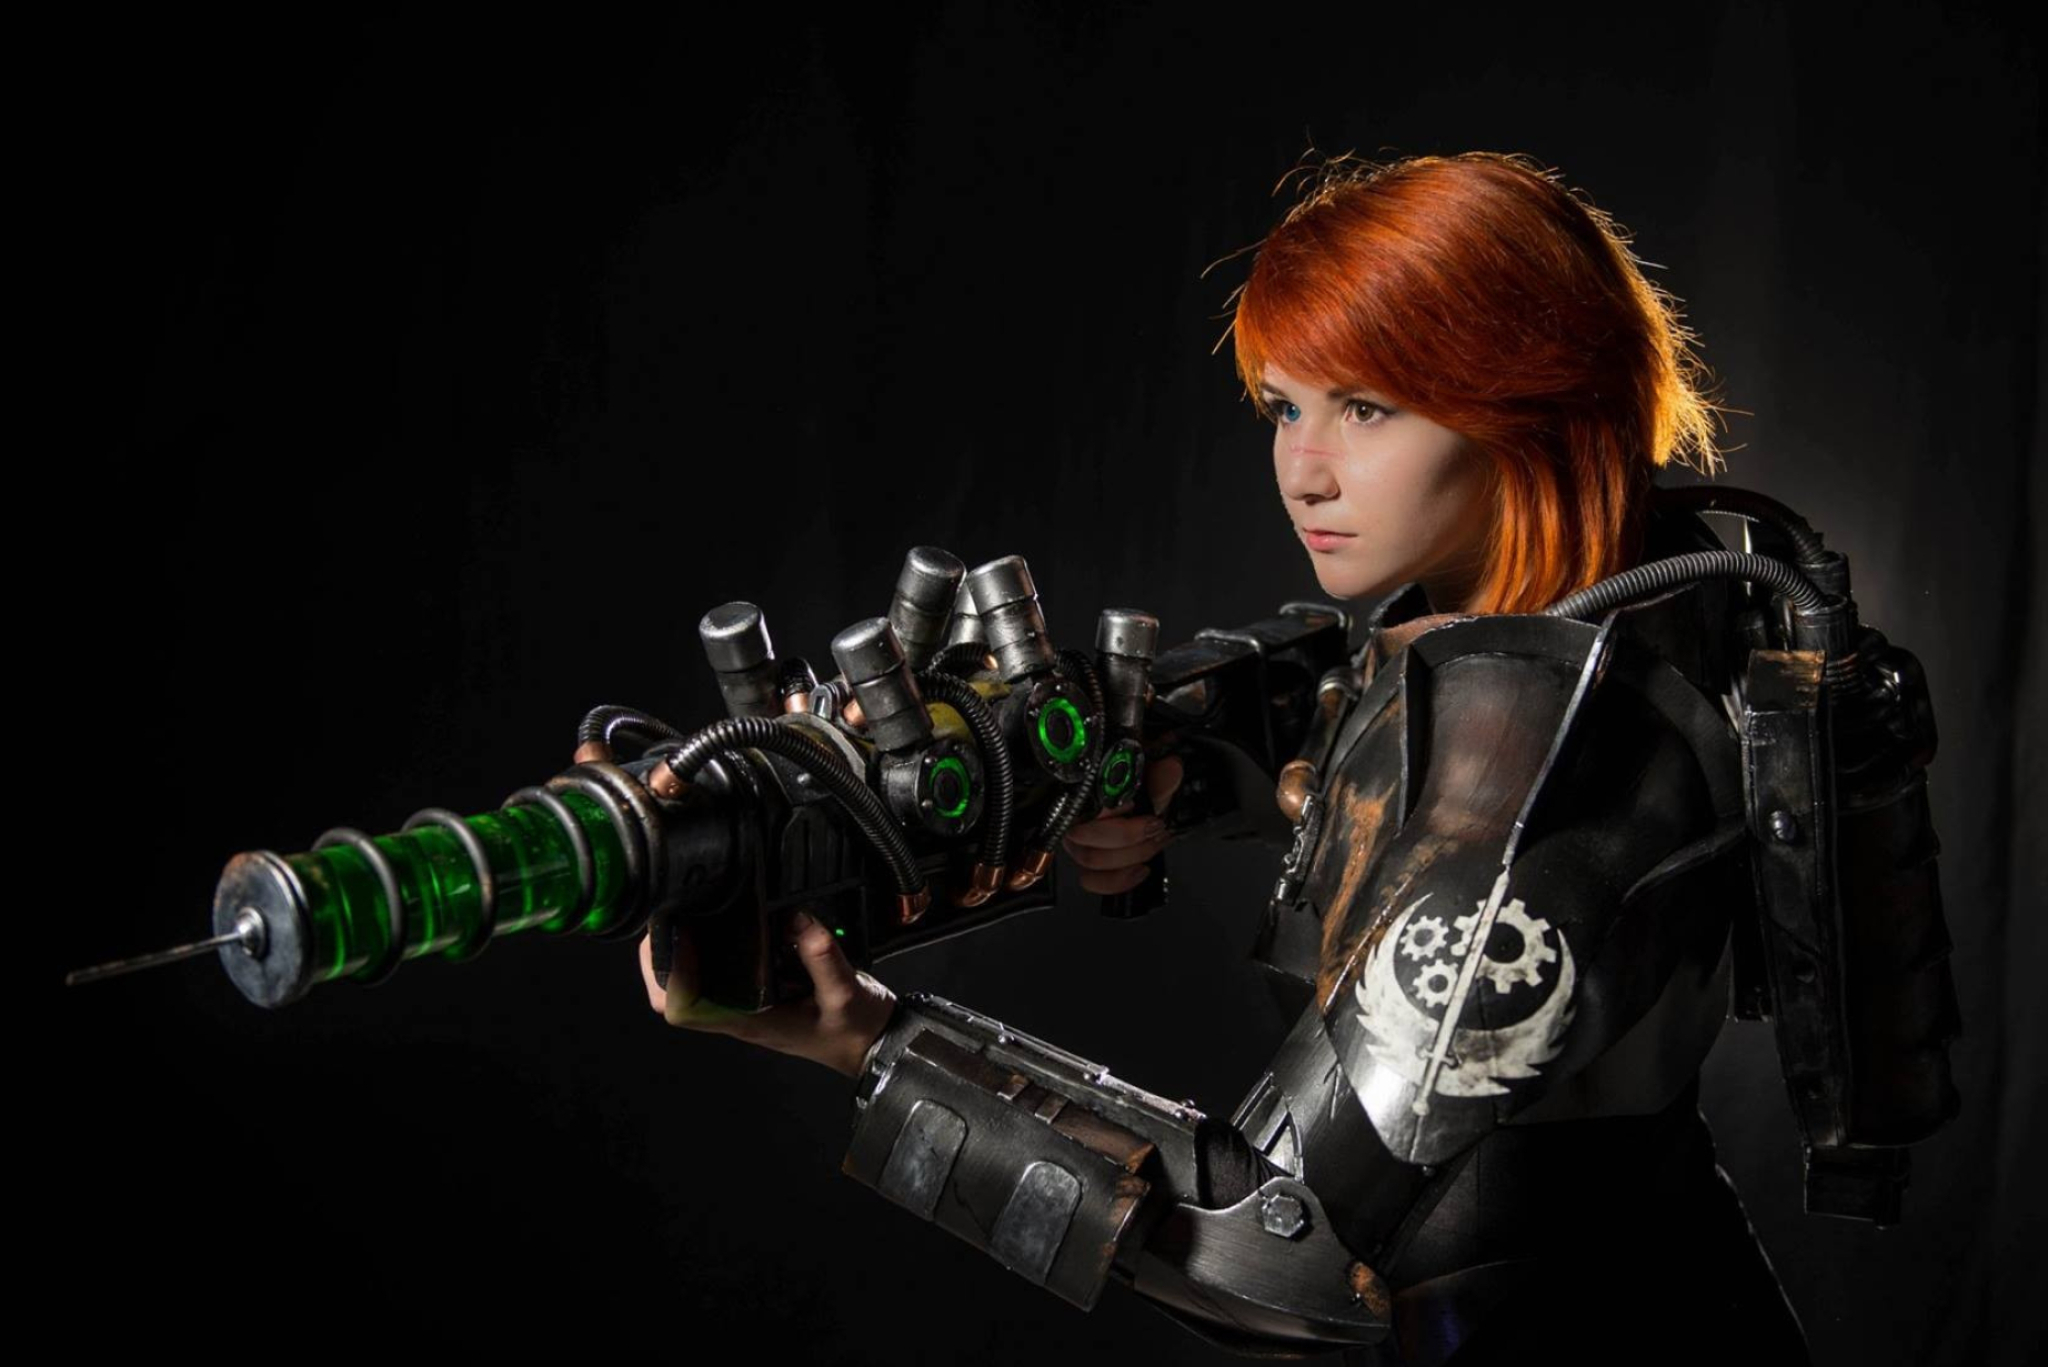 2048x1367 Wallpaper : women, redhead, cosplay, fashion, power armor, Fallout 4, clothing, guitarist, singing, stage, darkness, costume, screenshot, computer wallpaper pvtpwn 96327 HD Wallpapers